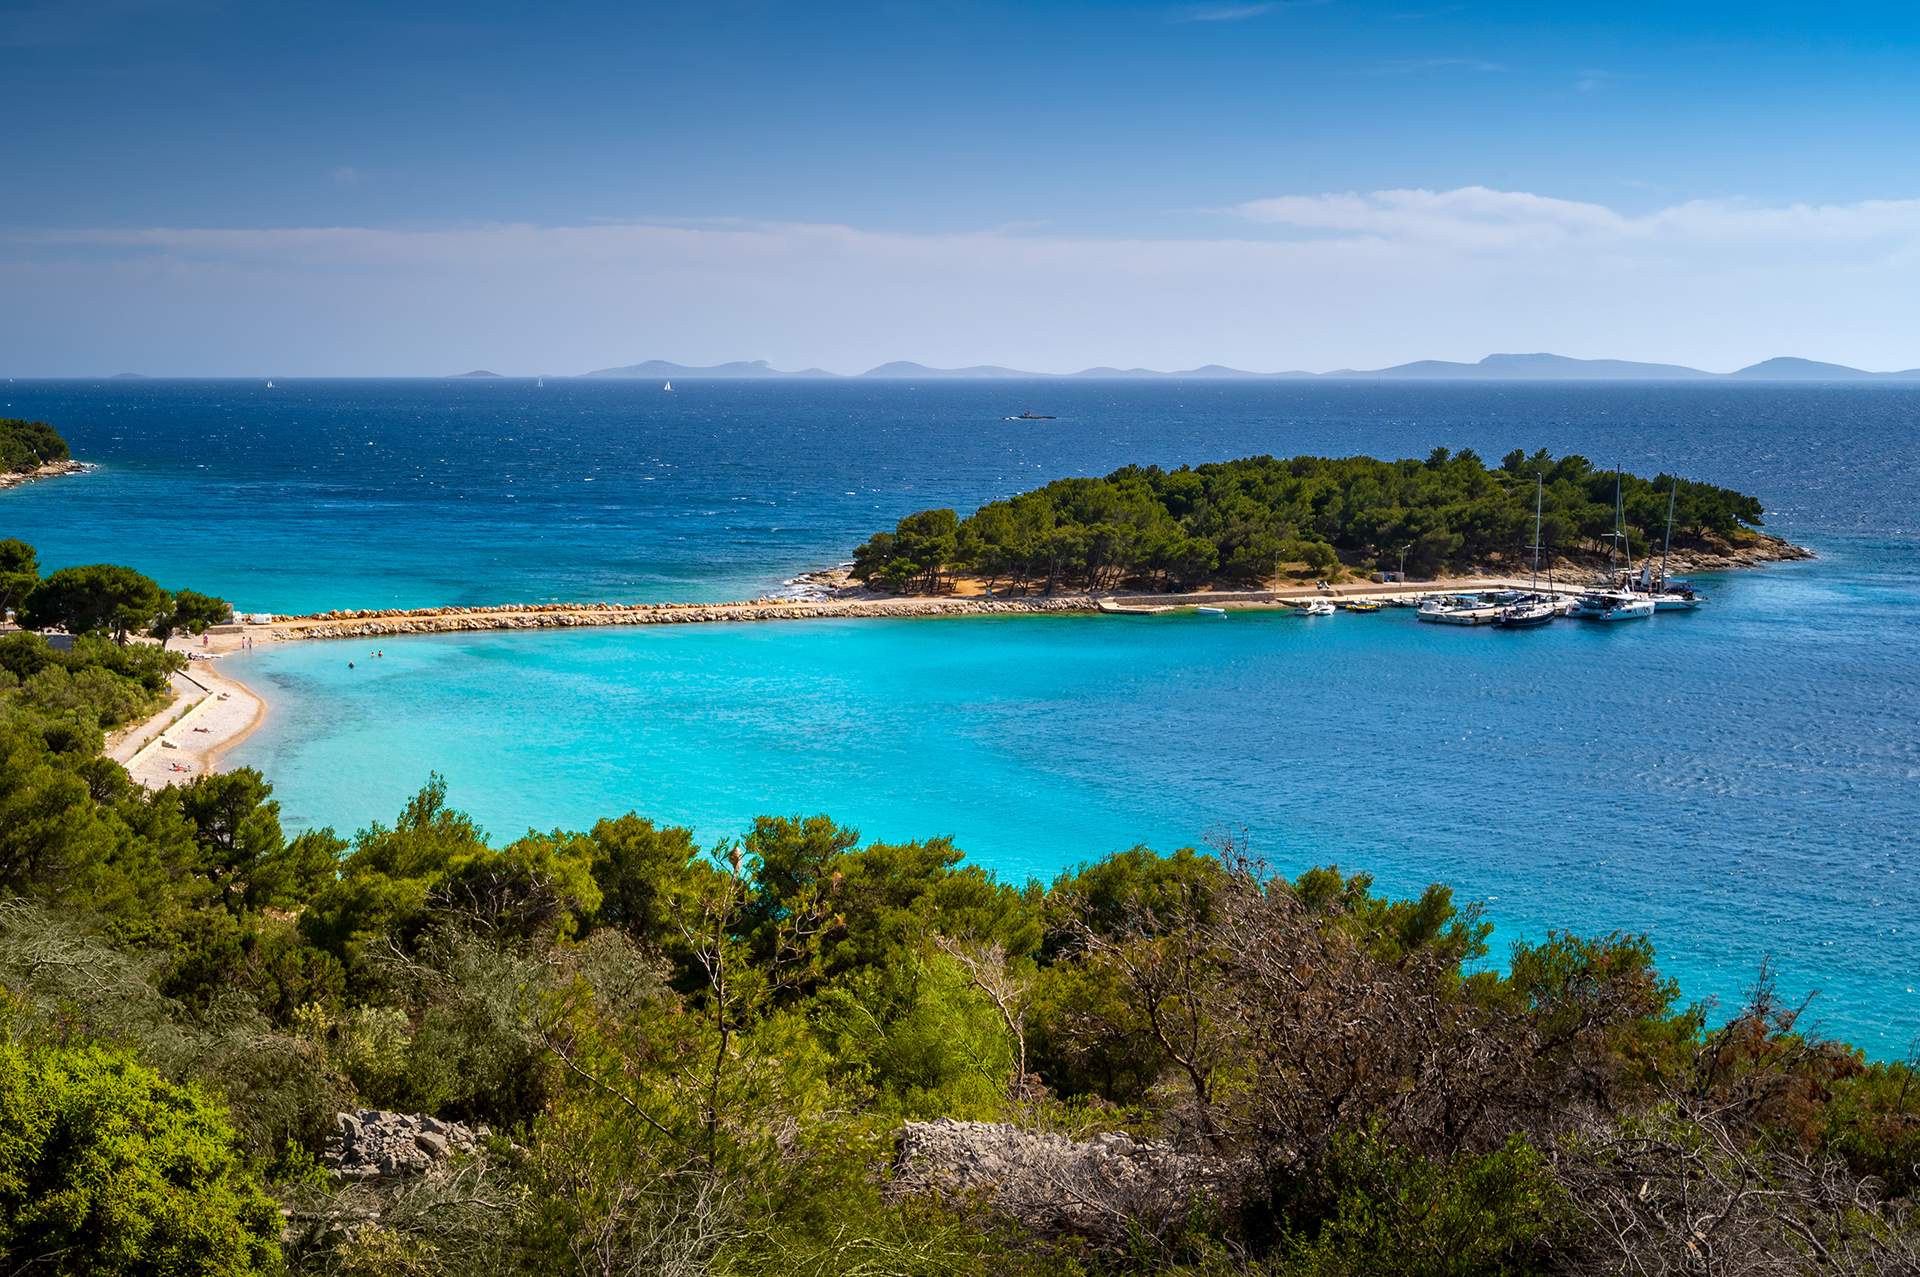 Northern Dalmatia – Places worth visiting and seeing online